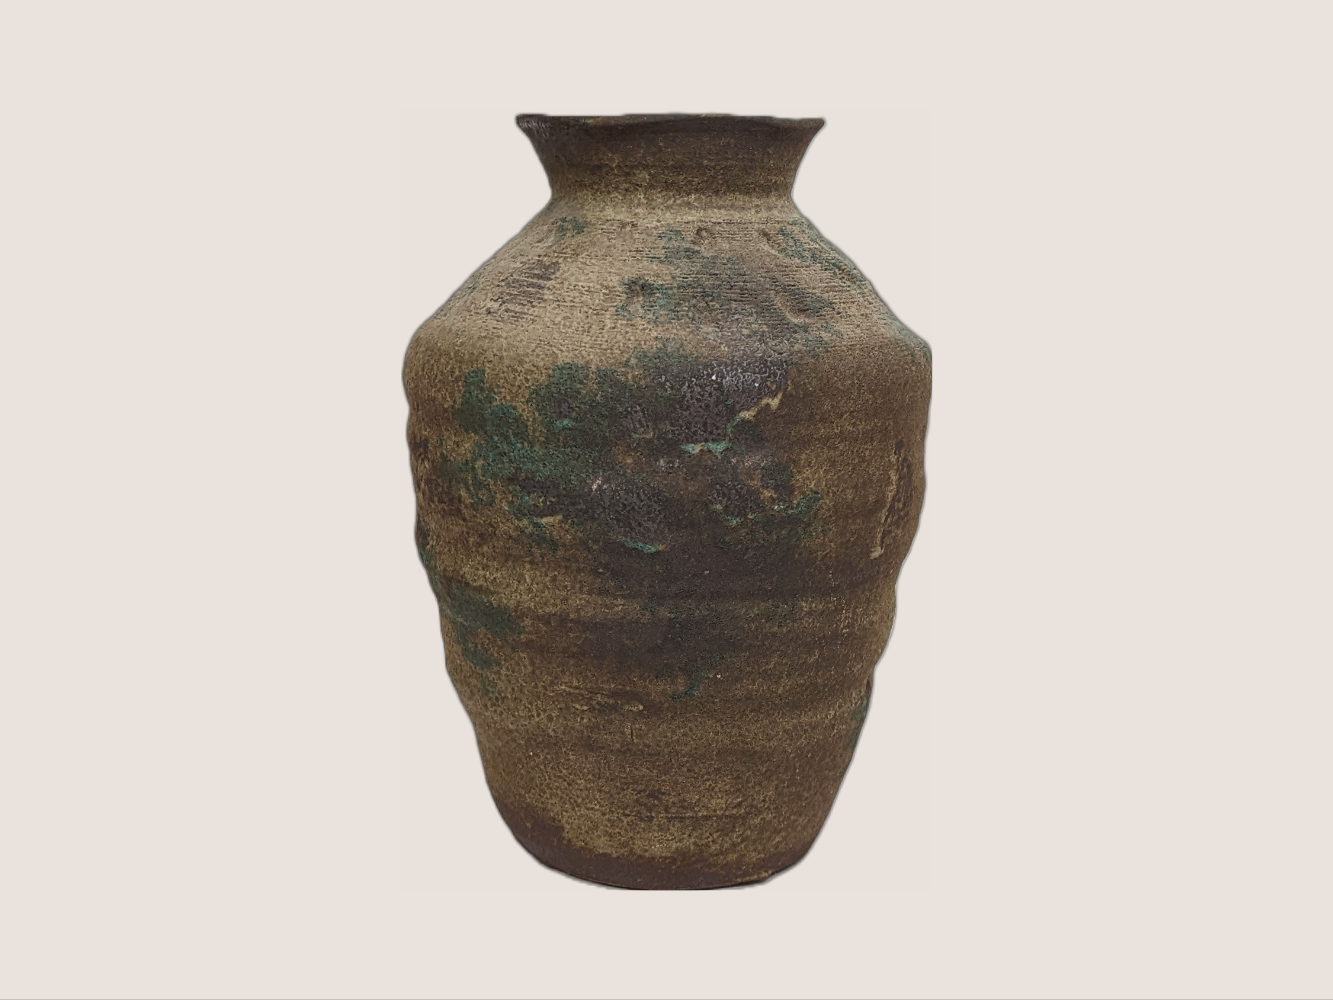 Dark terra cotta vase, 12 inches tall in urn shape with brown color, with natural accents of gray, blue, and black. Antique look. 